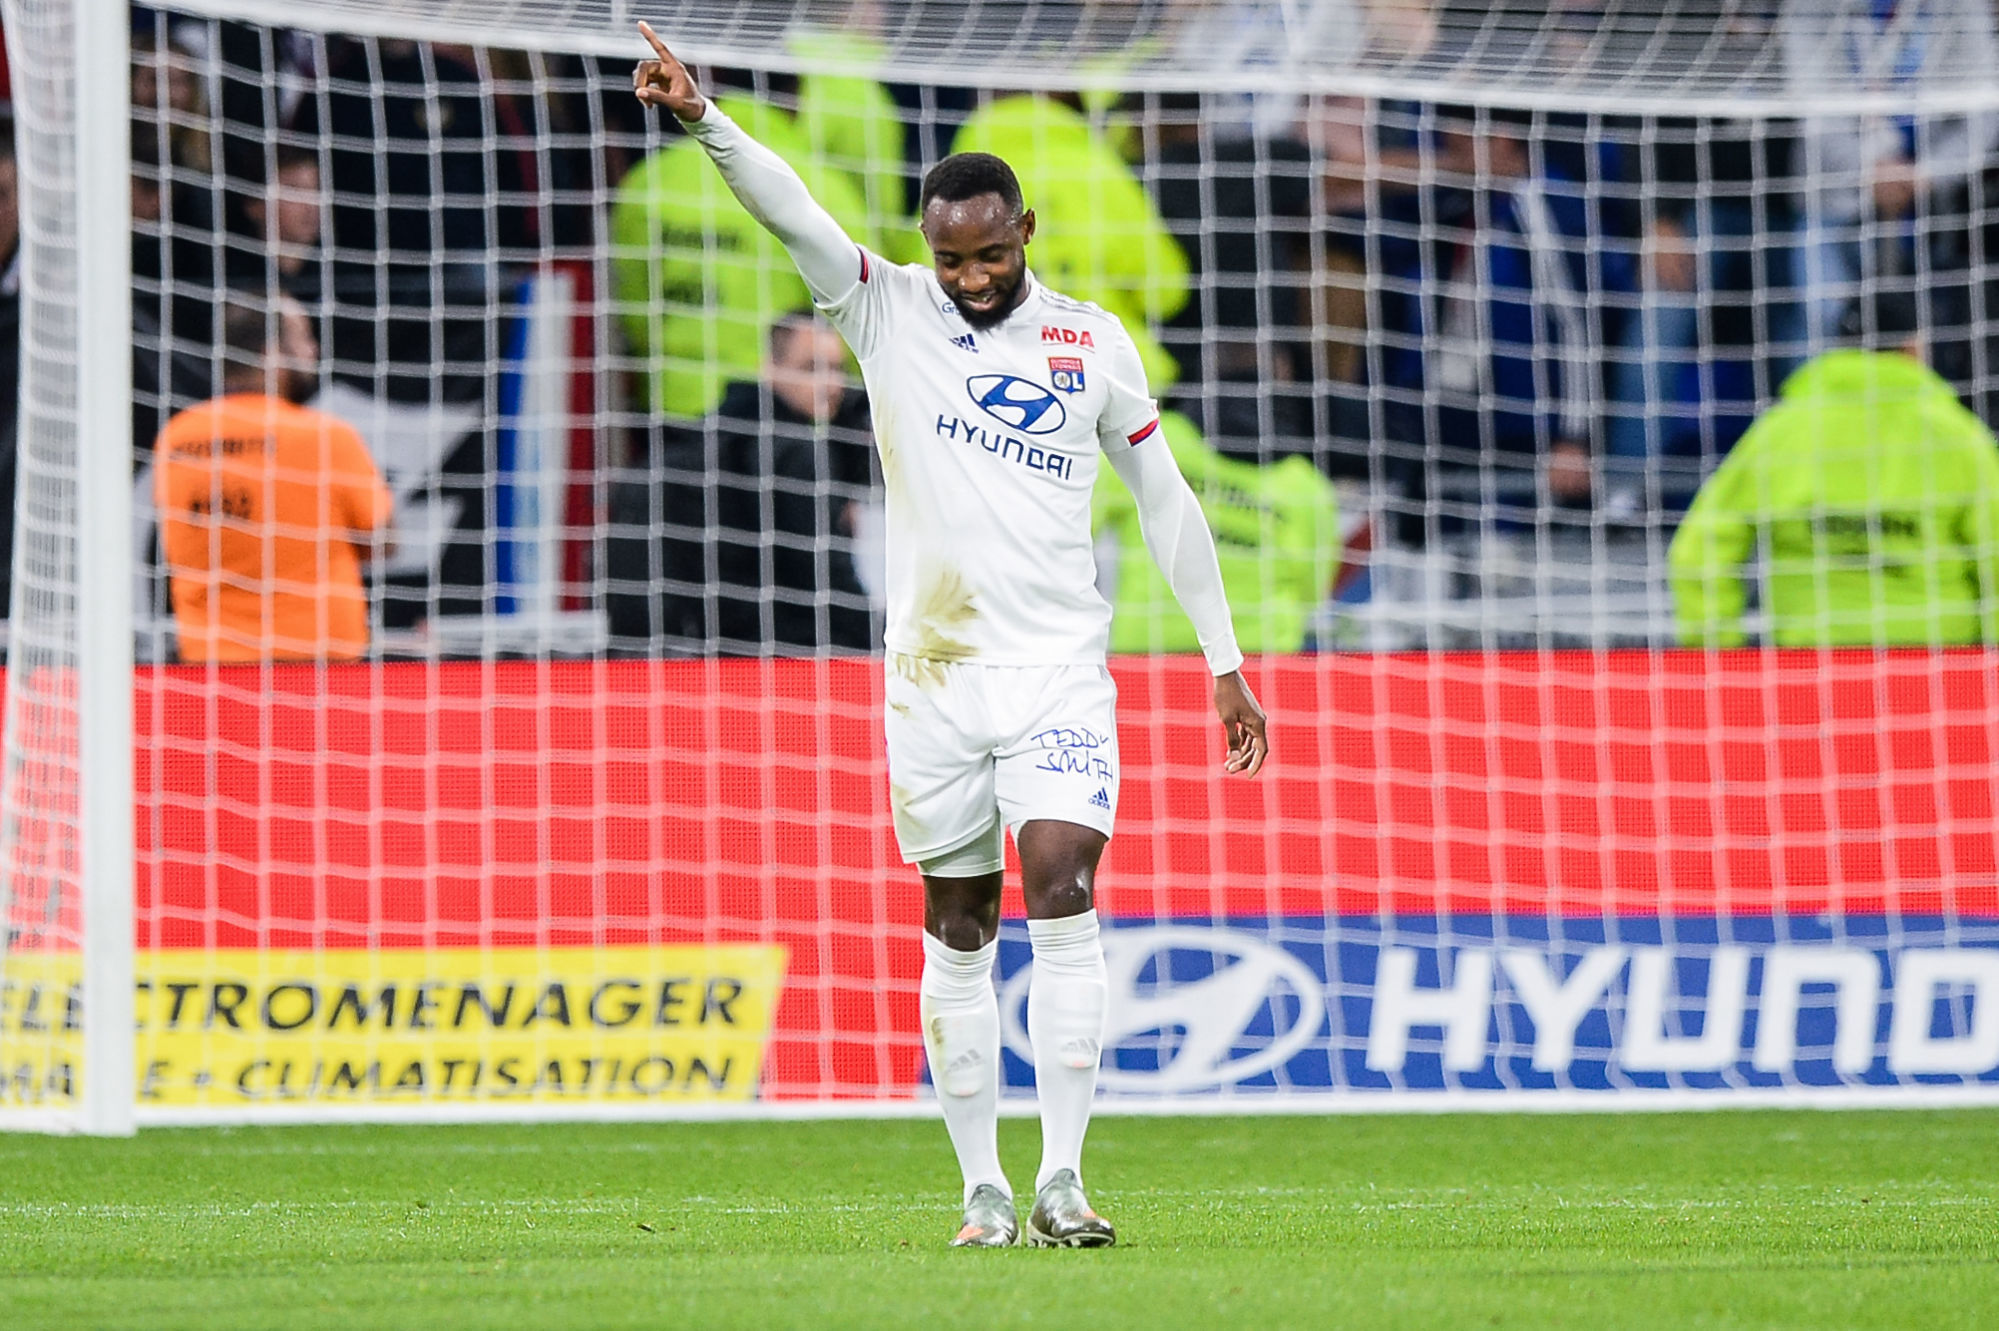 Moussa DEMBELE of Lyon celebrates his goal during the French Ligue 1 football match between Lyon and Metz at Groupama Stadium on October 26, 2019 in Lyon, France. (Photo by Baptiste Fernandez/Icon Sport) - Moussa DEMBELE - Groupama Stadium - Lyon (France)